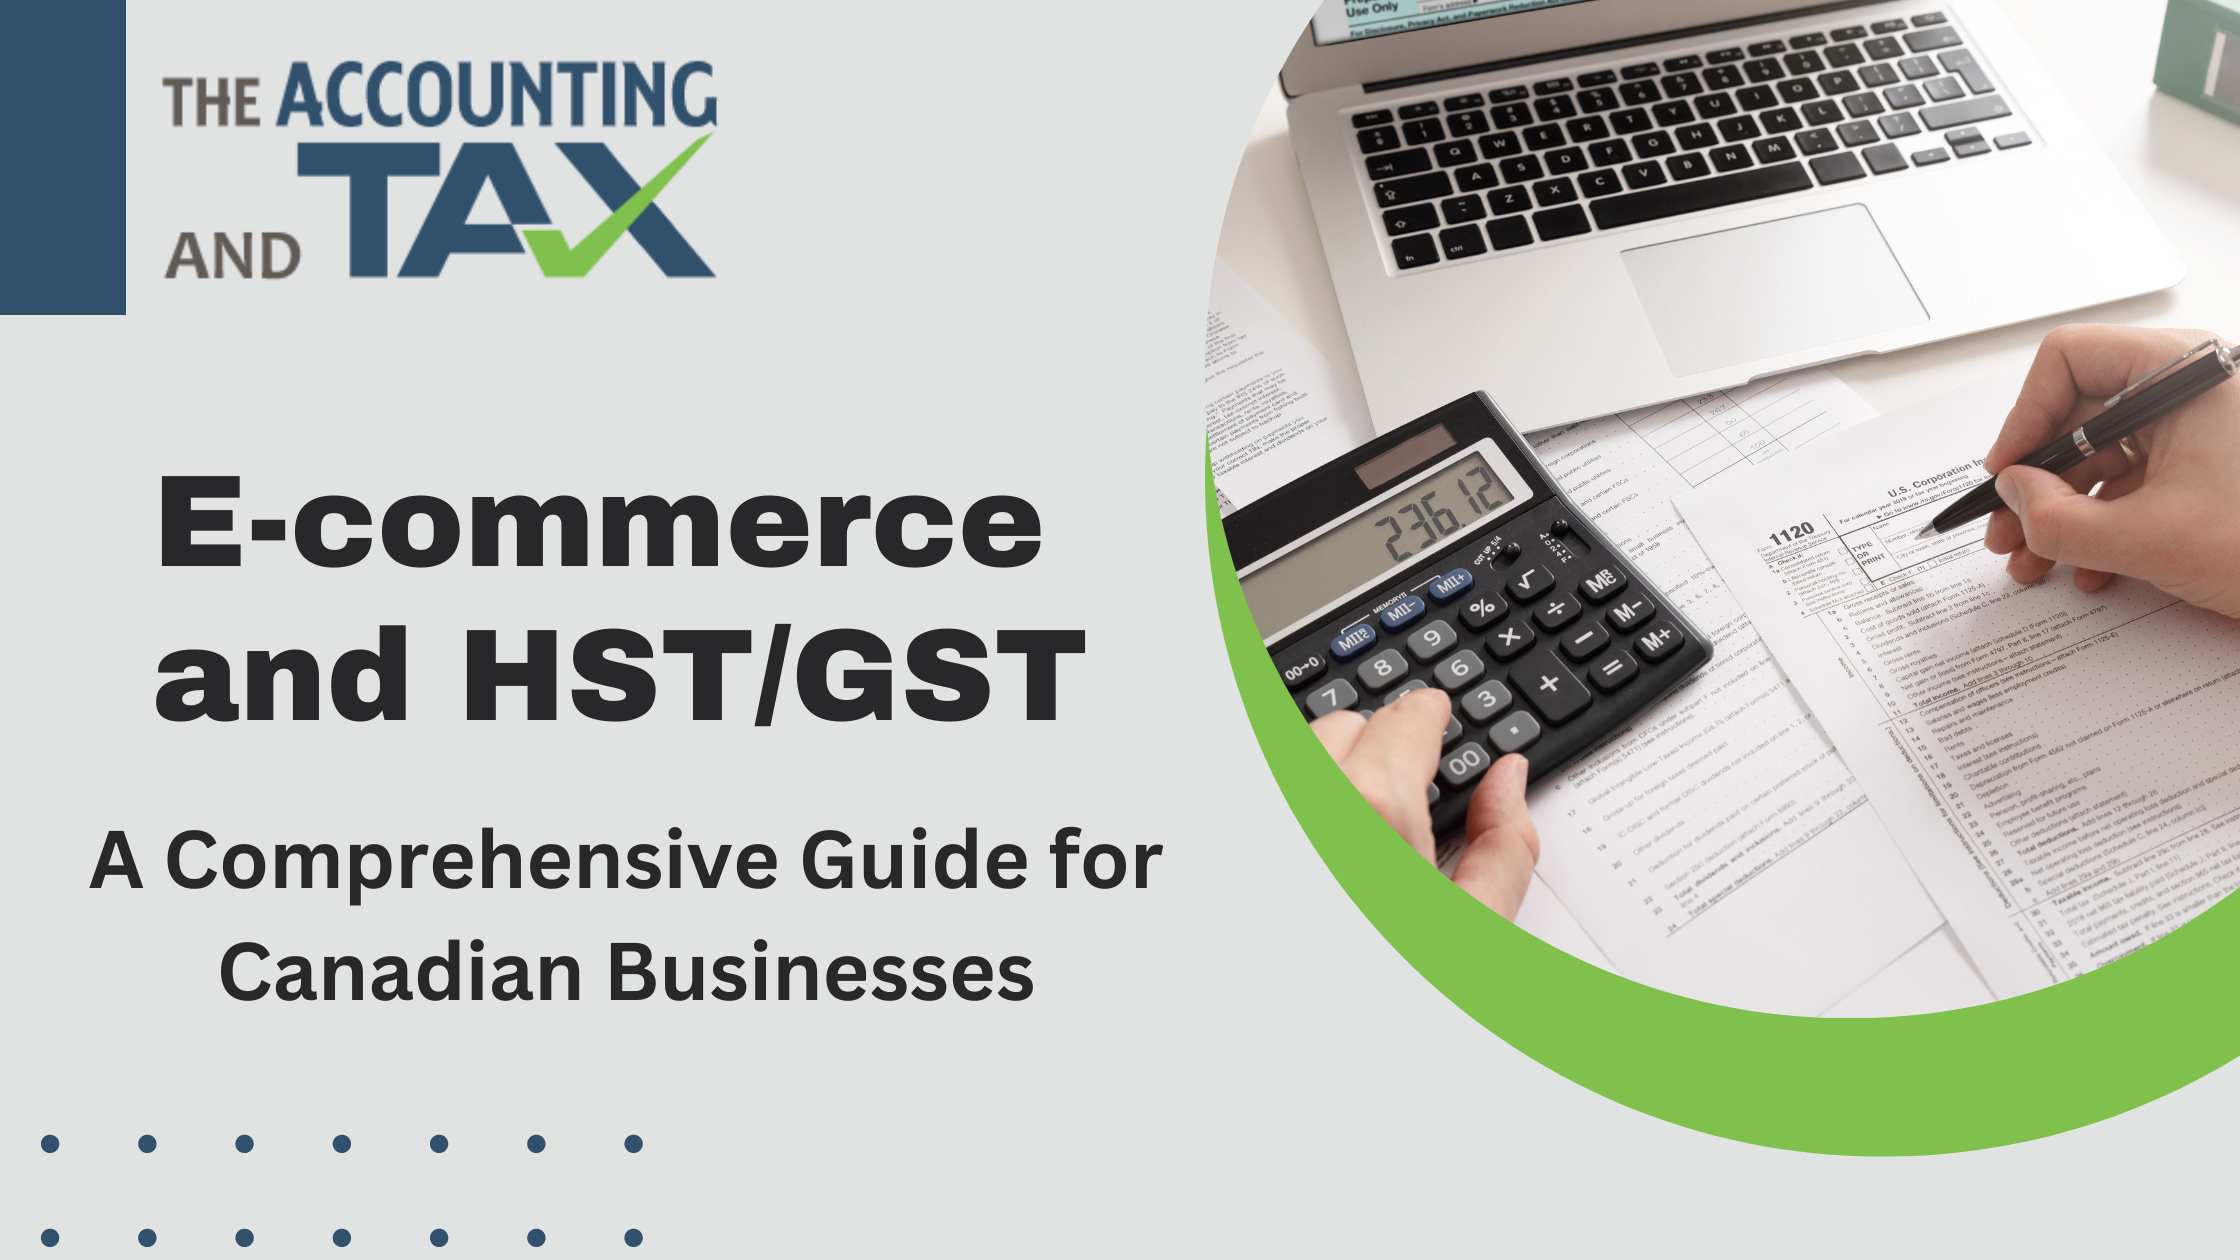 E-commerce and HST/GST